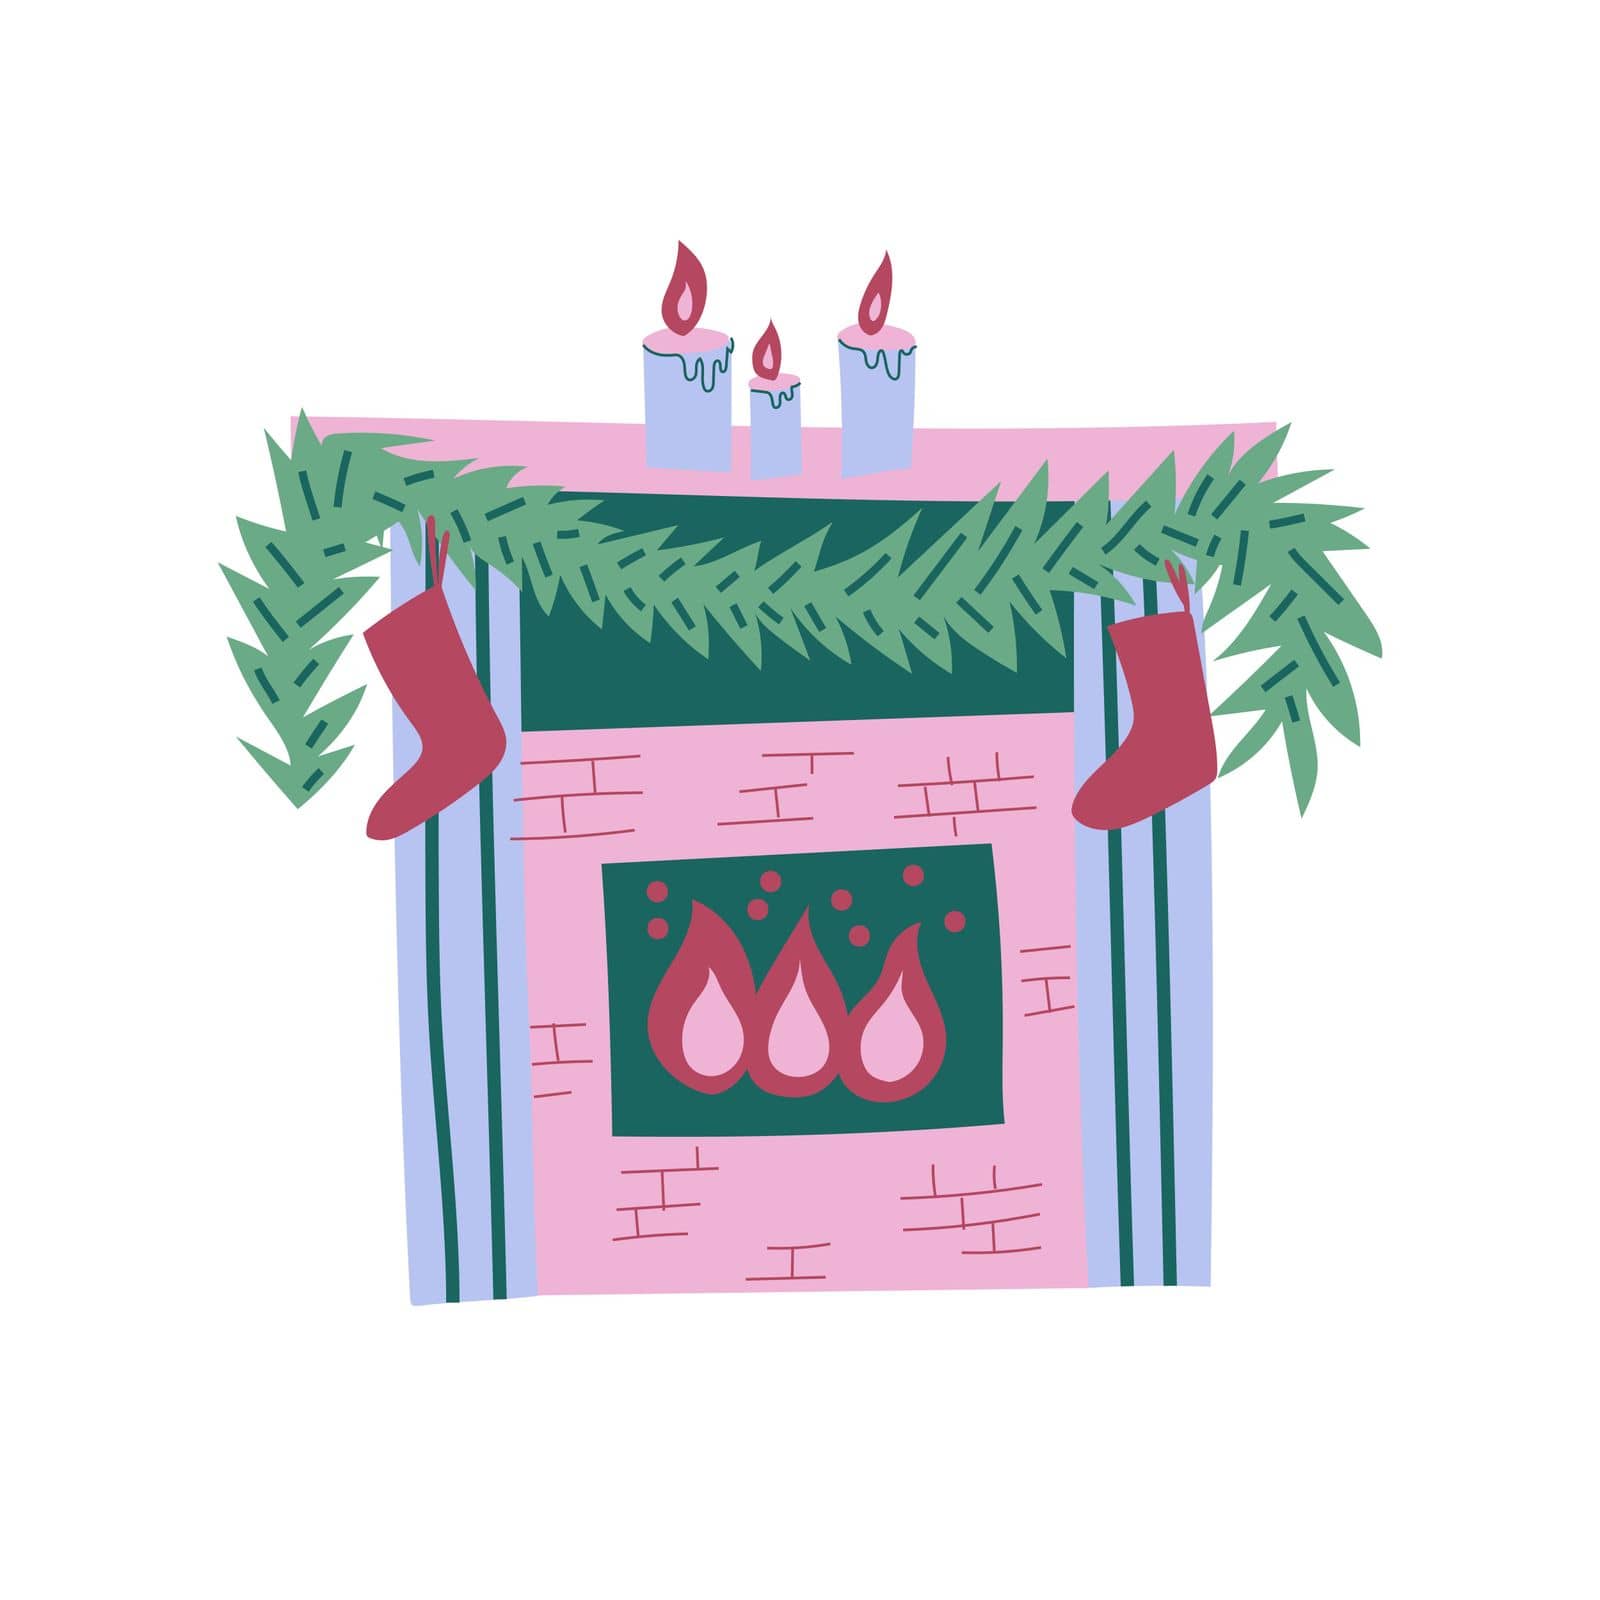 Cozy Christmas fireplace illustration by chickfishdoodles